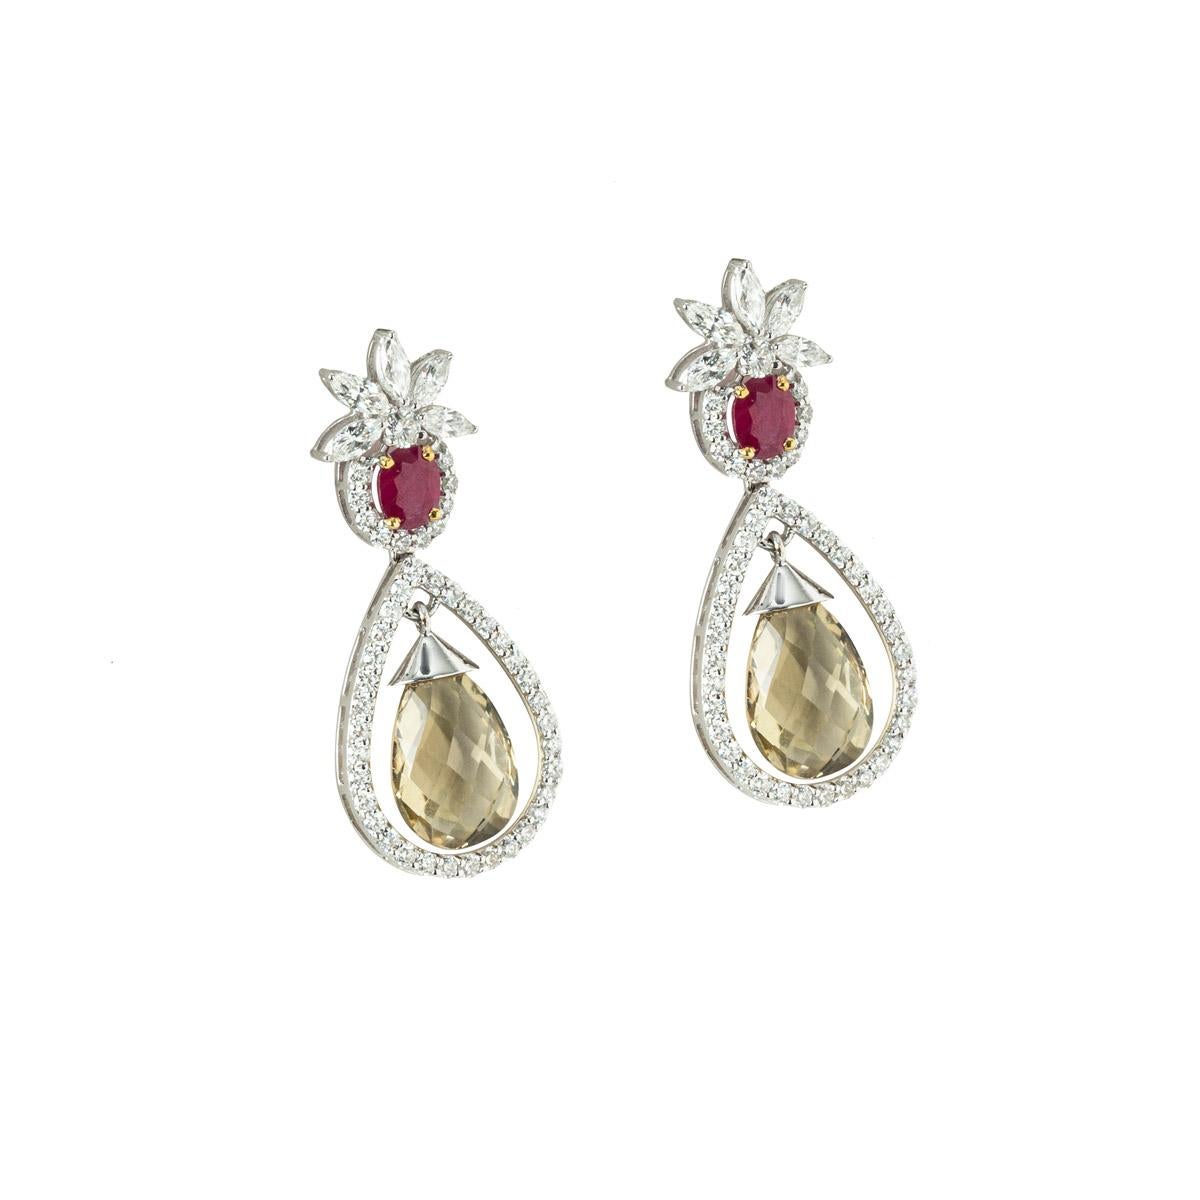 A unique pair of 14k white gold diamond and multi-gemstone drop earrings. The earrings feature ruby with half a halo of round brilliant cut diamonds under the ruby and marquise cut diamonds like a crown style above the ruby. The earrings tail off